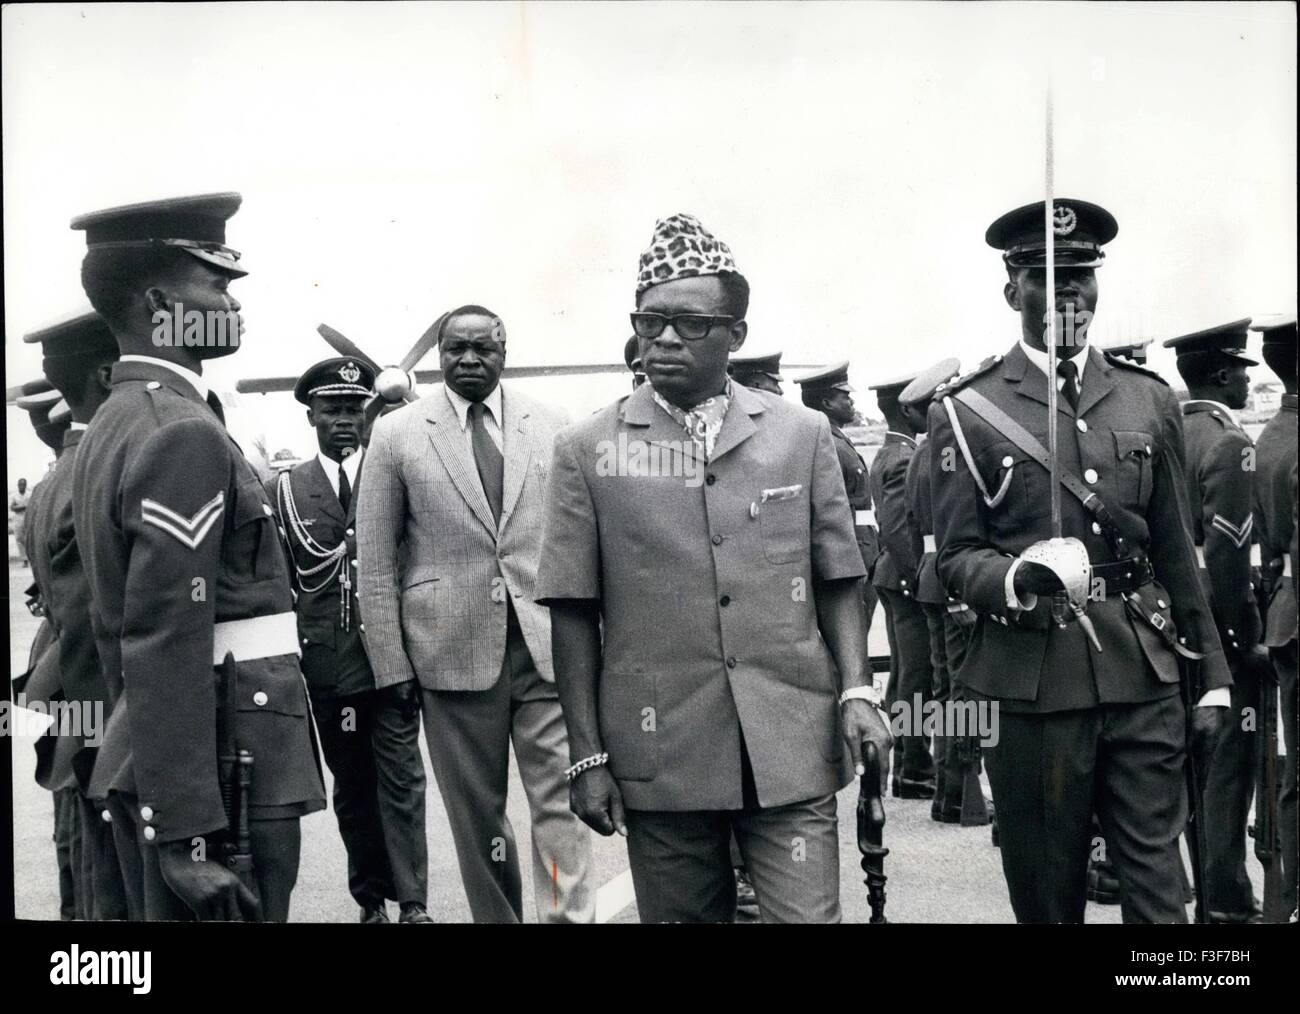 1974 - During his official Visit to Uganda, President Mobutu Sese Seko of Zaire Inspects a Smart Contingent of the Uganda Air Force. Behind His Walked Unsmiling President Amin. © Keystone Pictures USA/ZUMAPRESS.com/Alamy Live News Stock Photo